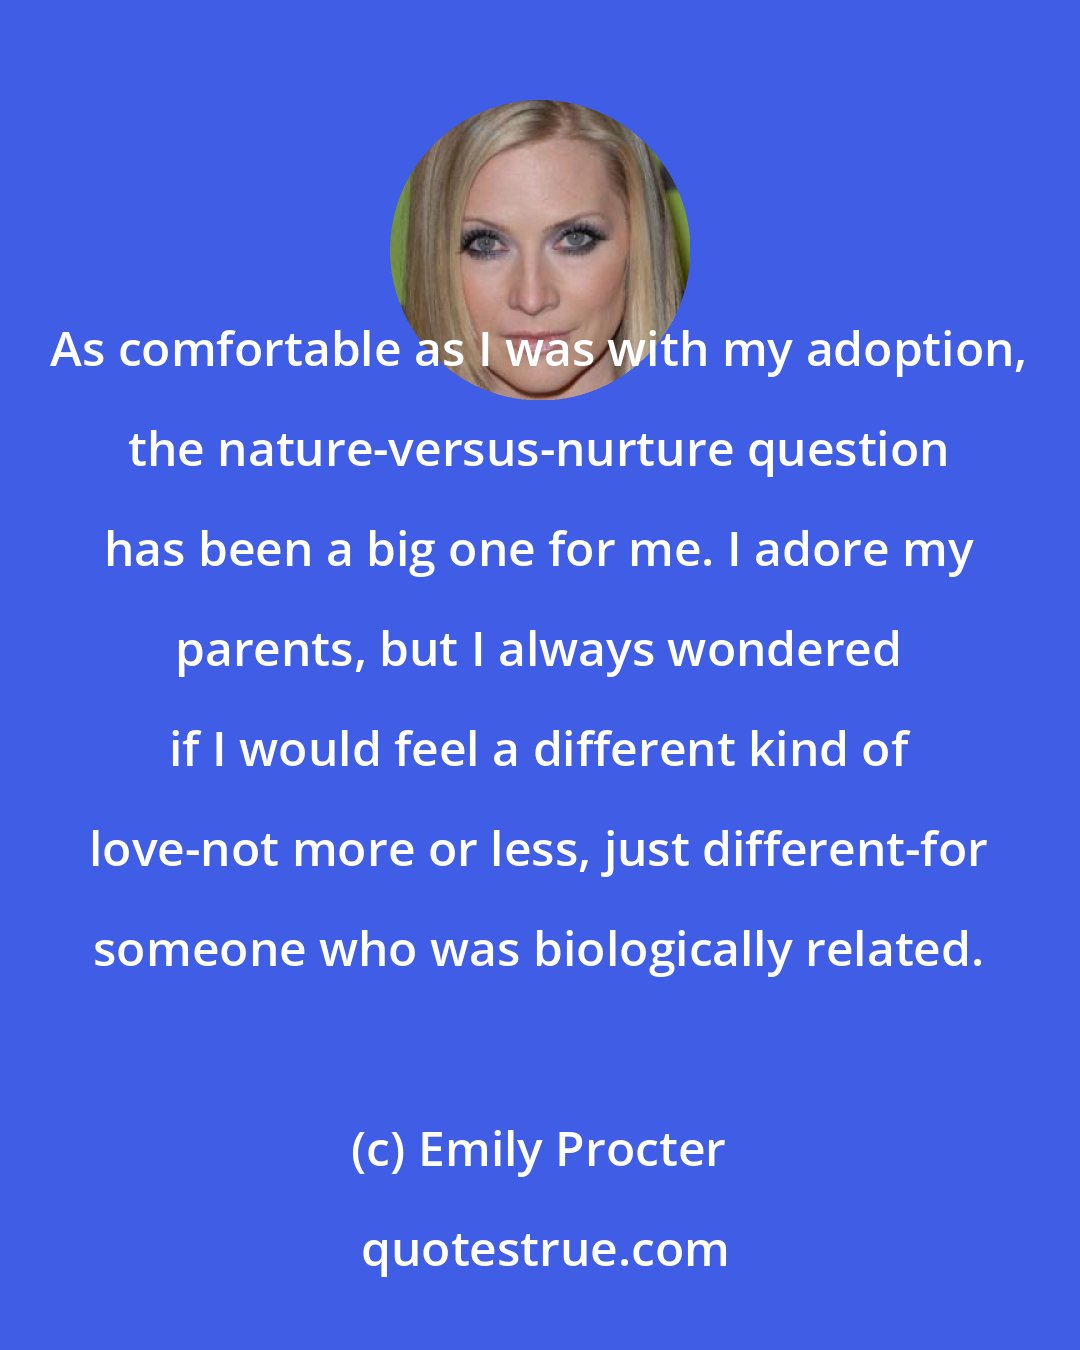 Emily Procter: As comfortable as I was with my adoption, the nature-versus-nurture question has been a big one for me. I adore my parents, but I always wondered if I would feel a different kind of love-not more or less, just different-for someone who was biologically related.